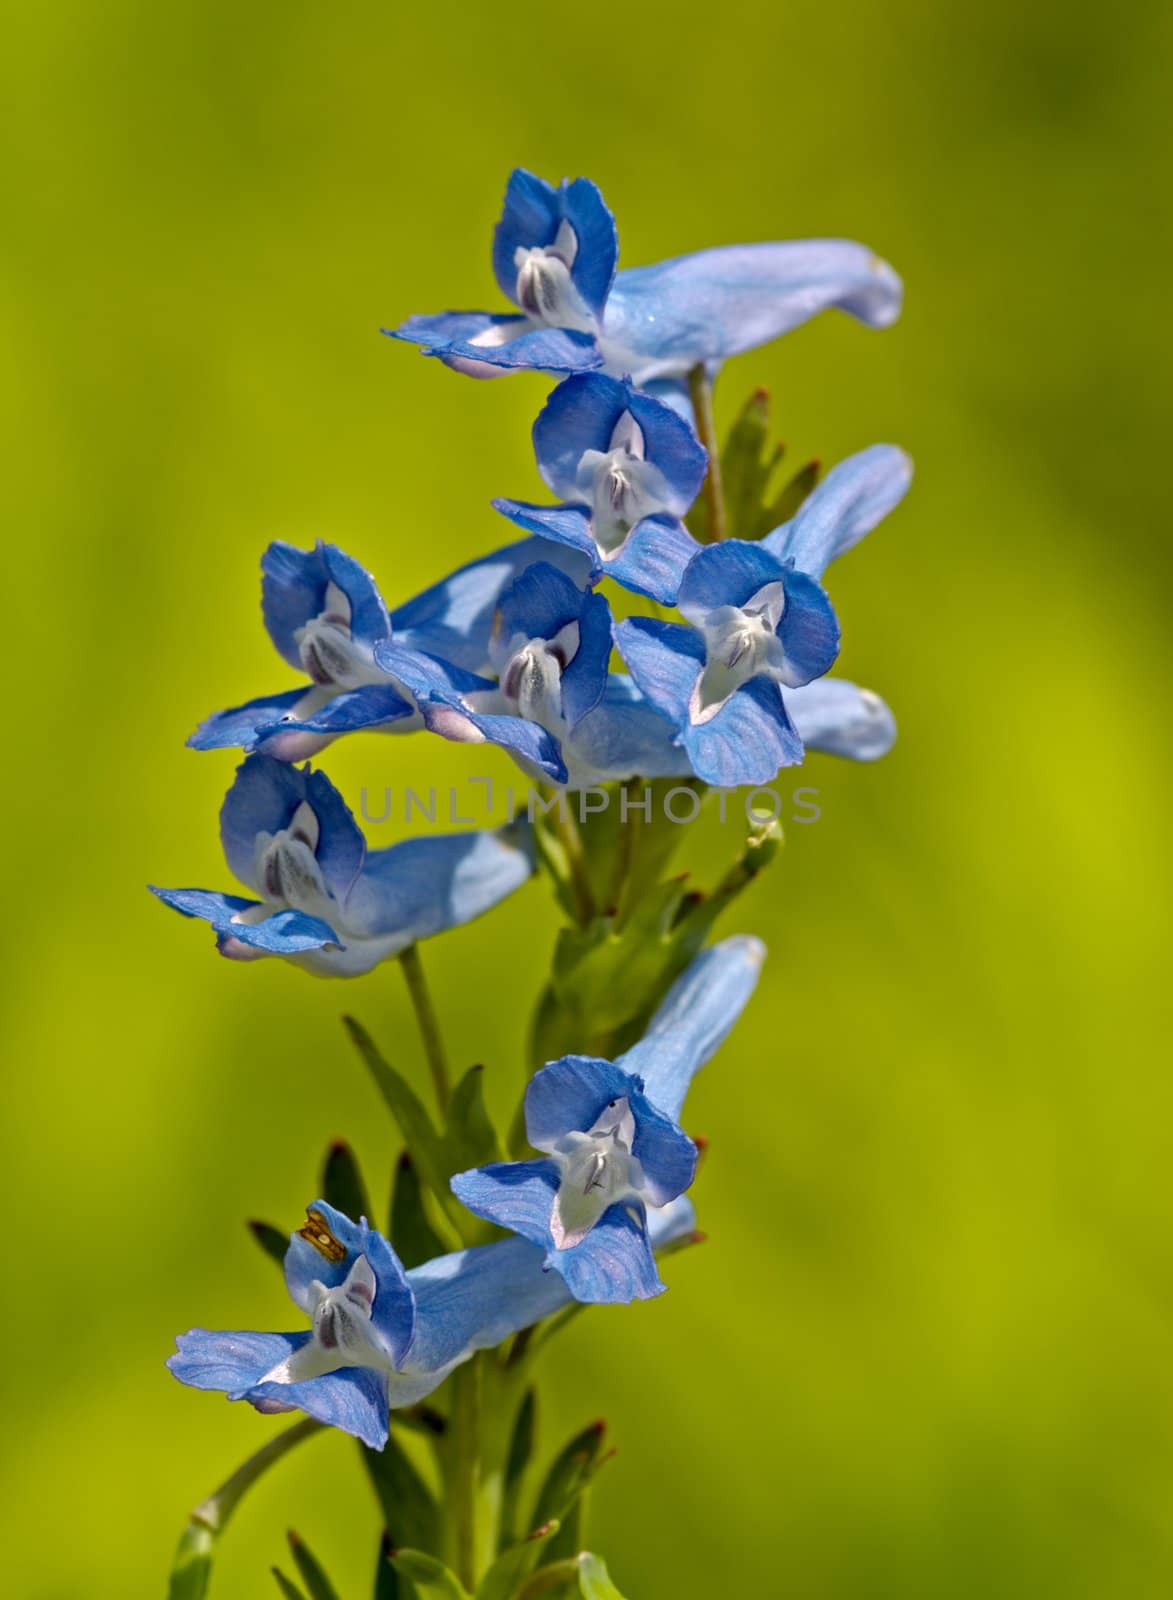 Inflorescence of blue meadow flowers on a green background